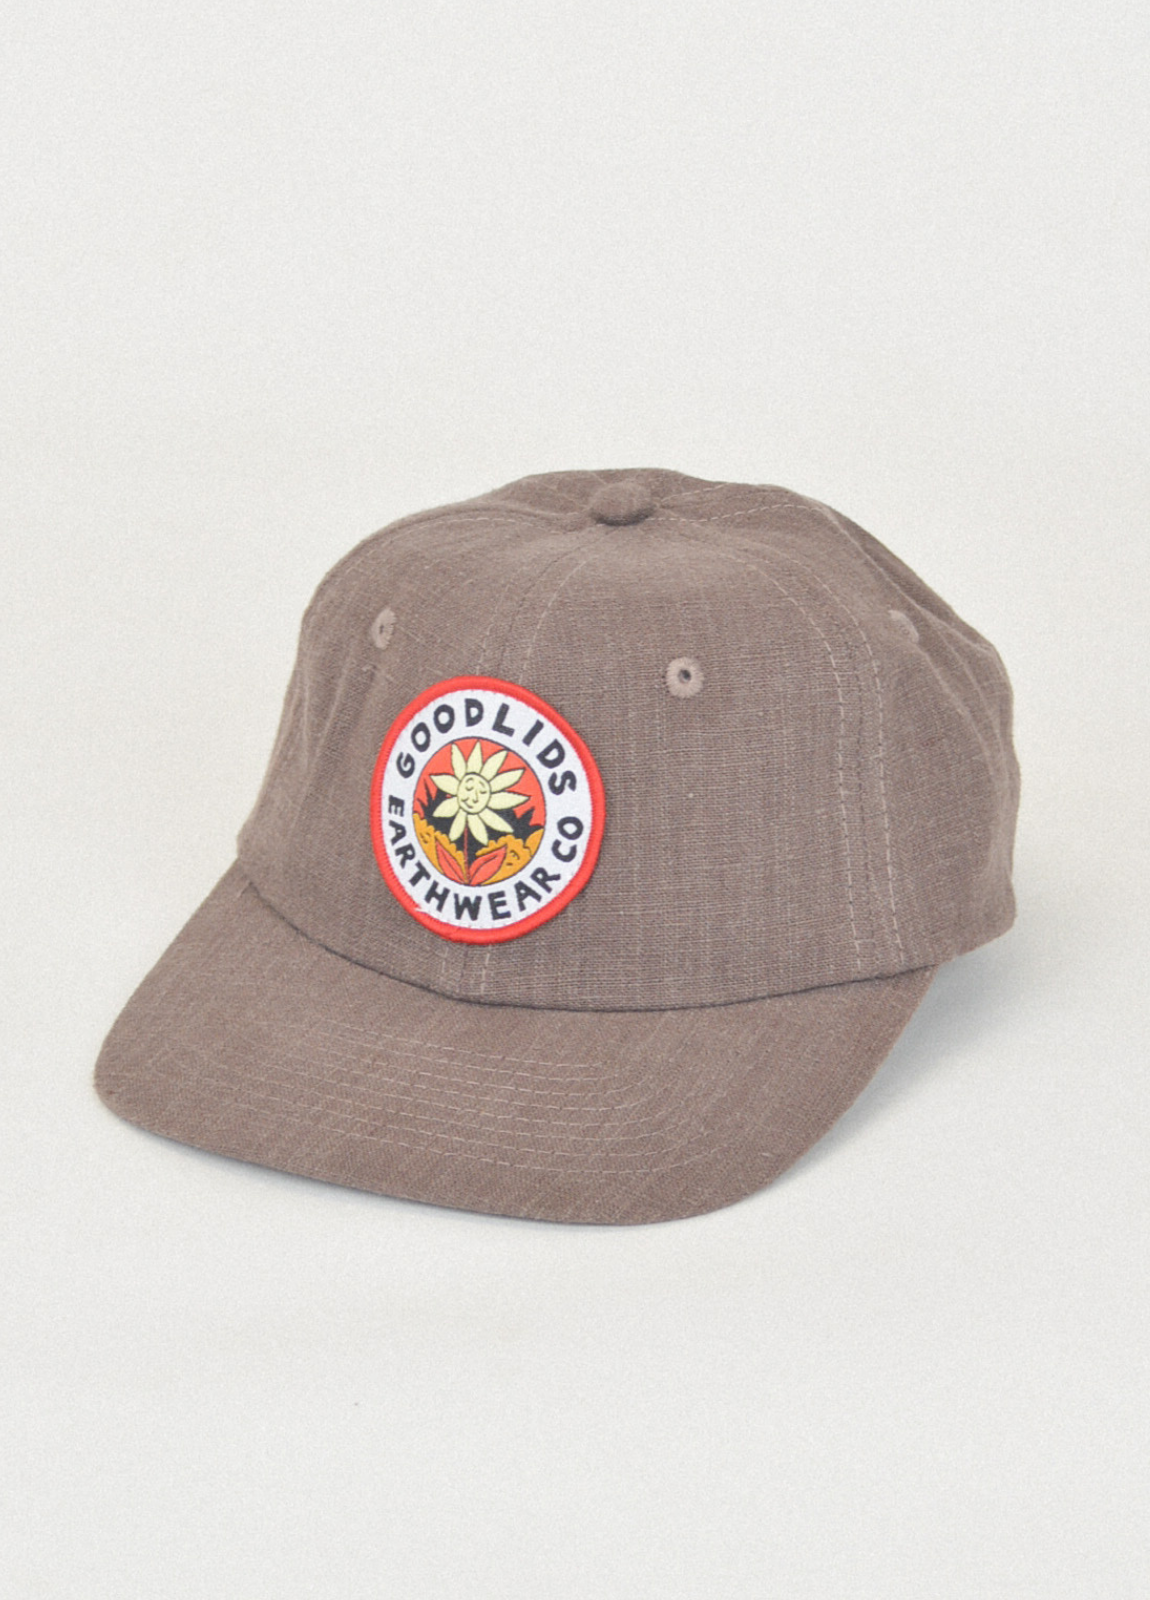 Chill Flower Lid - Brown